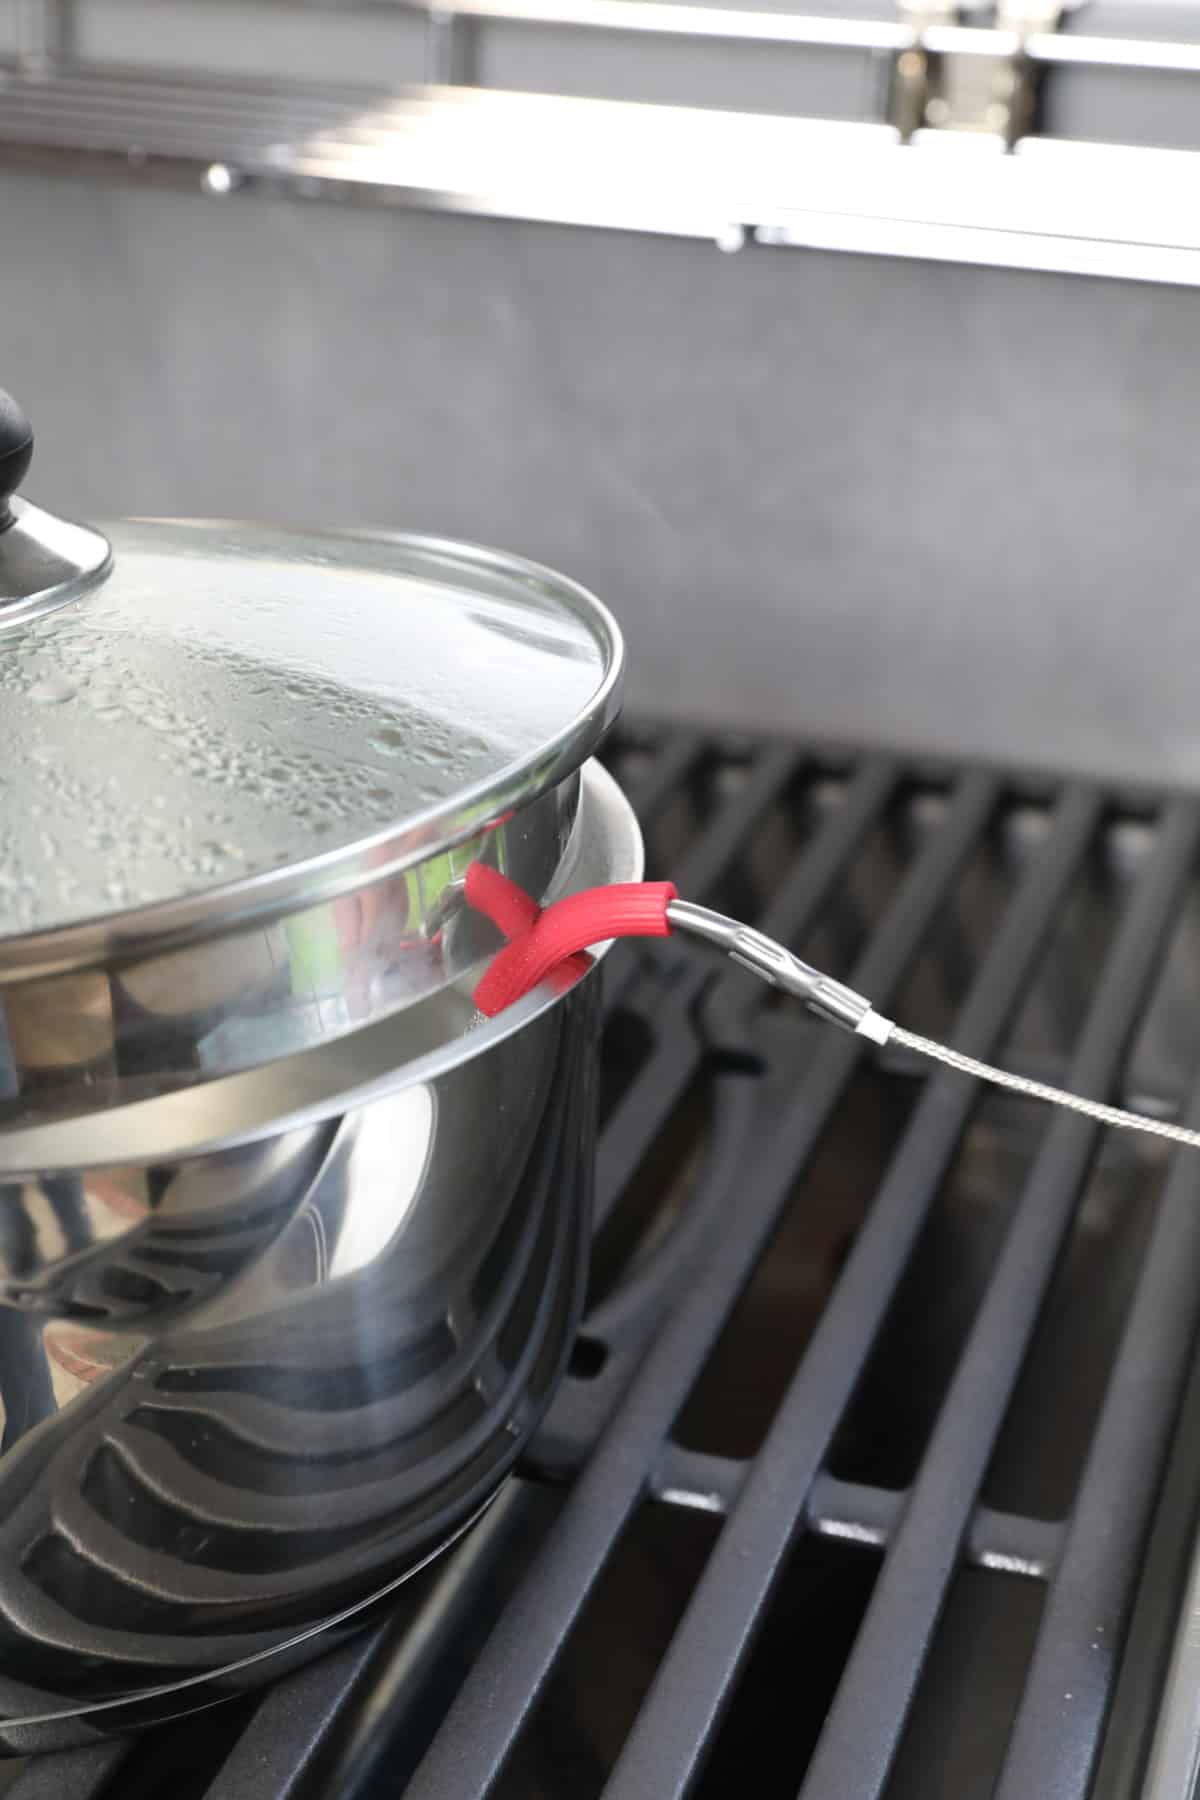 Weber iGrill 3 thermometer food probe in a pan of boiling water